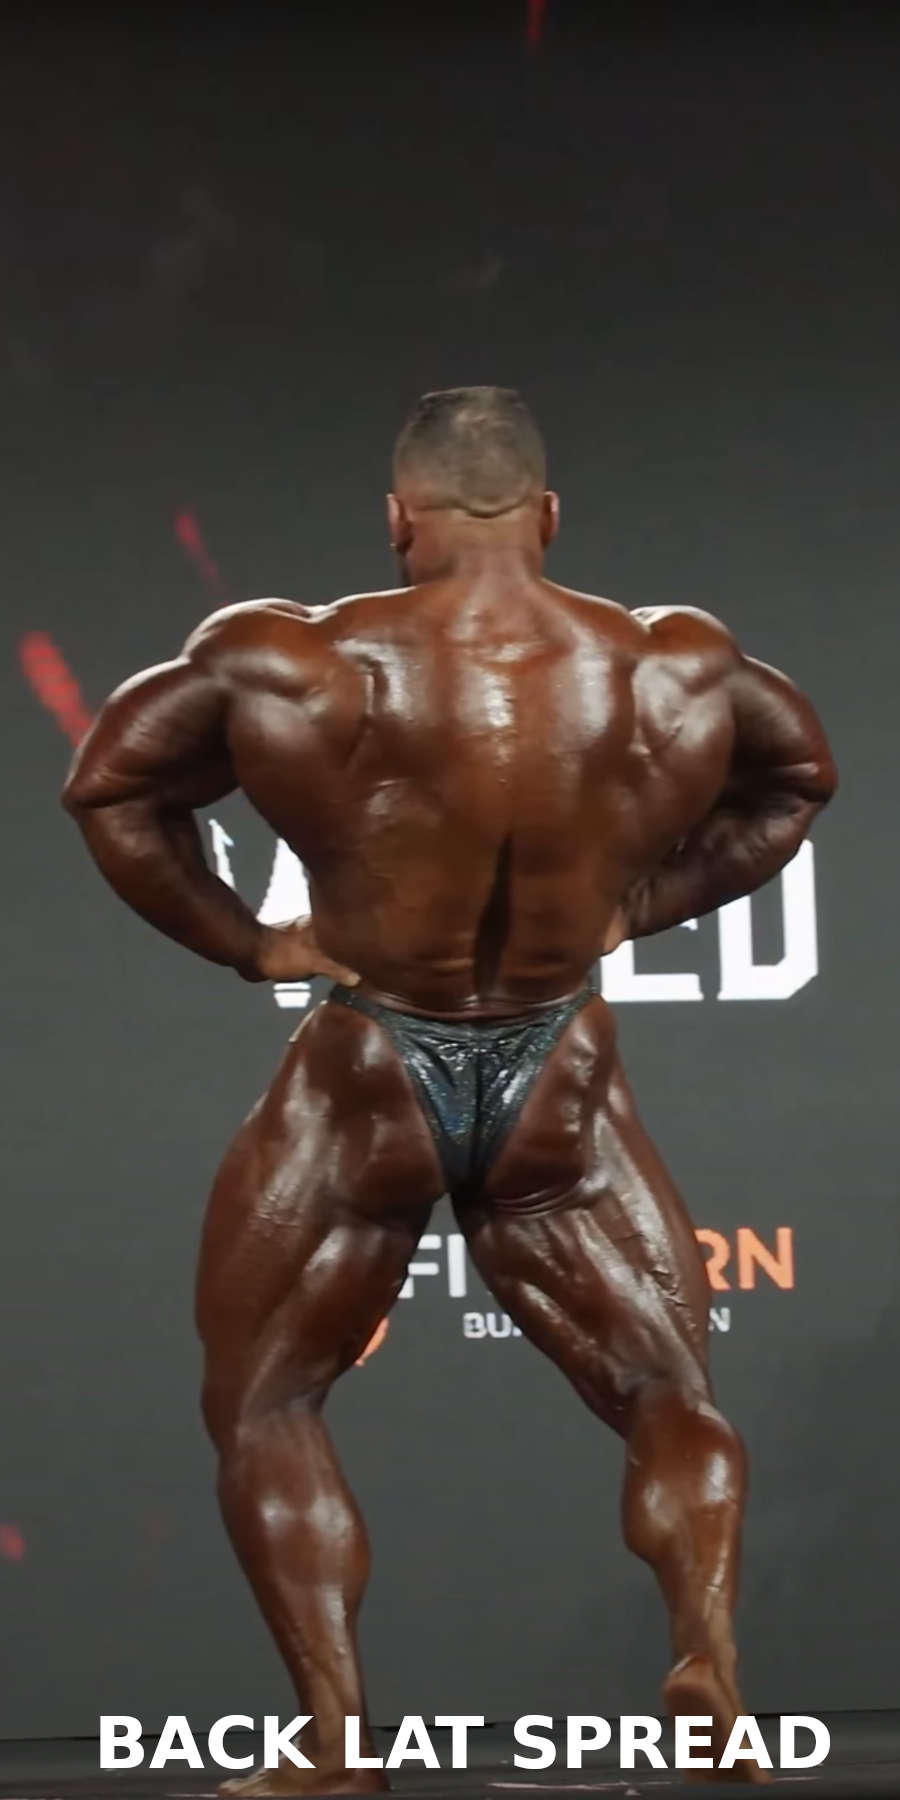 A bodybuilder performing the back lat spread pose on stage during a bodybuilding competition 